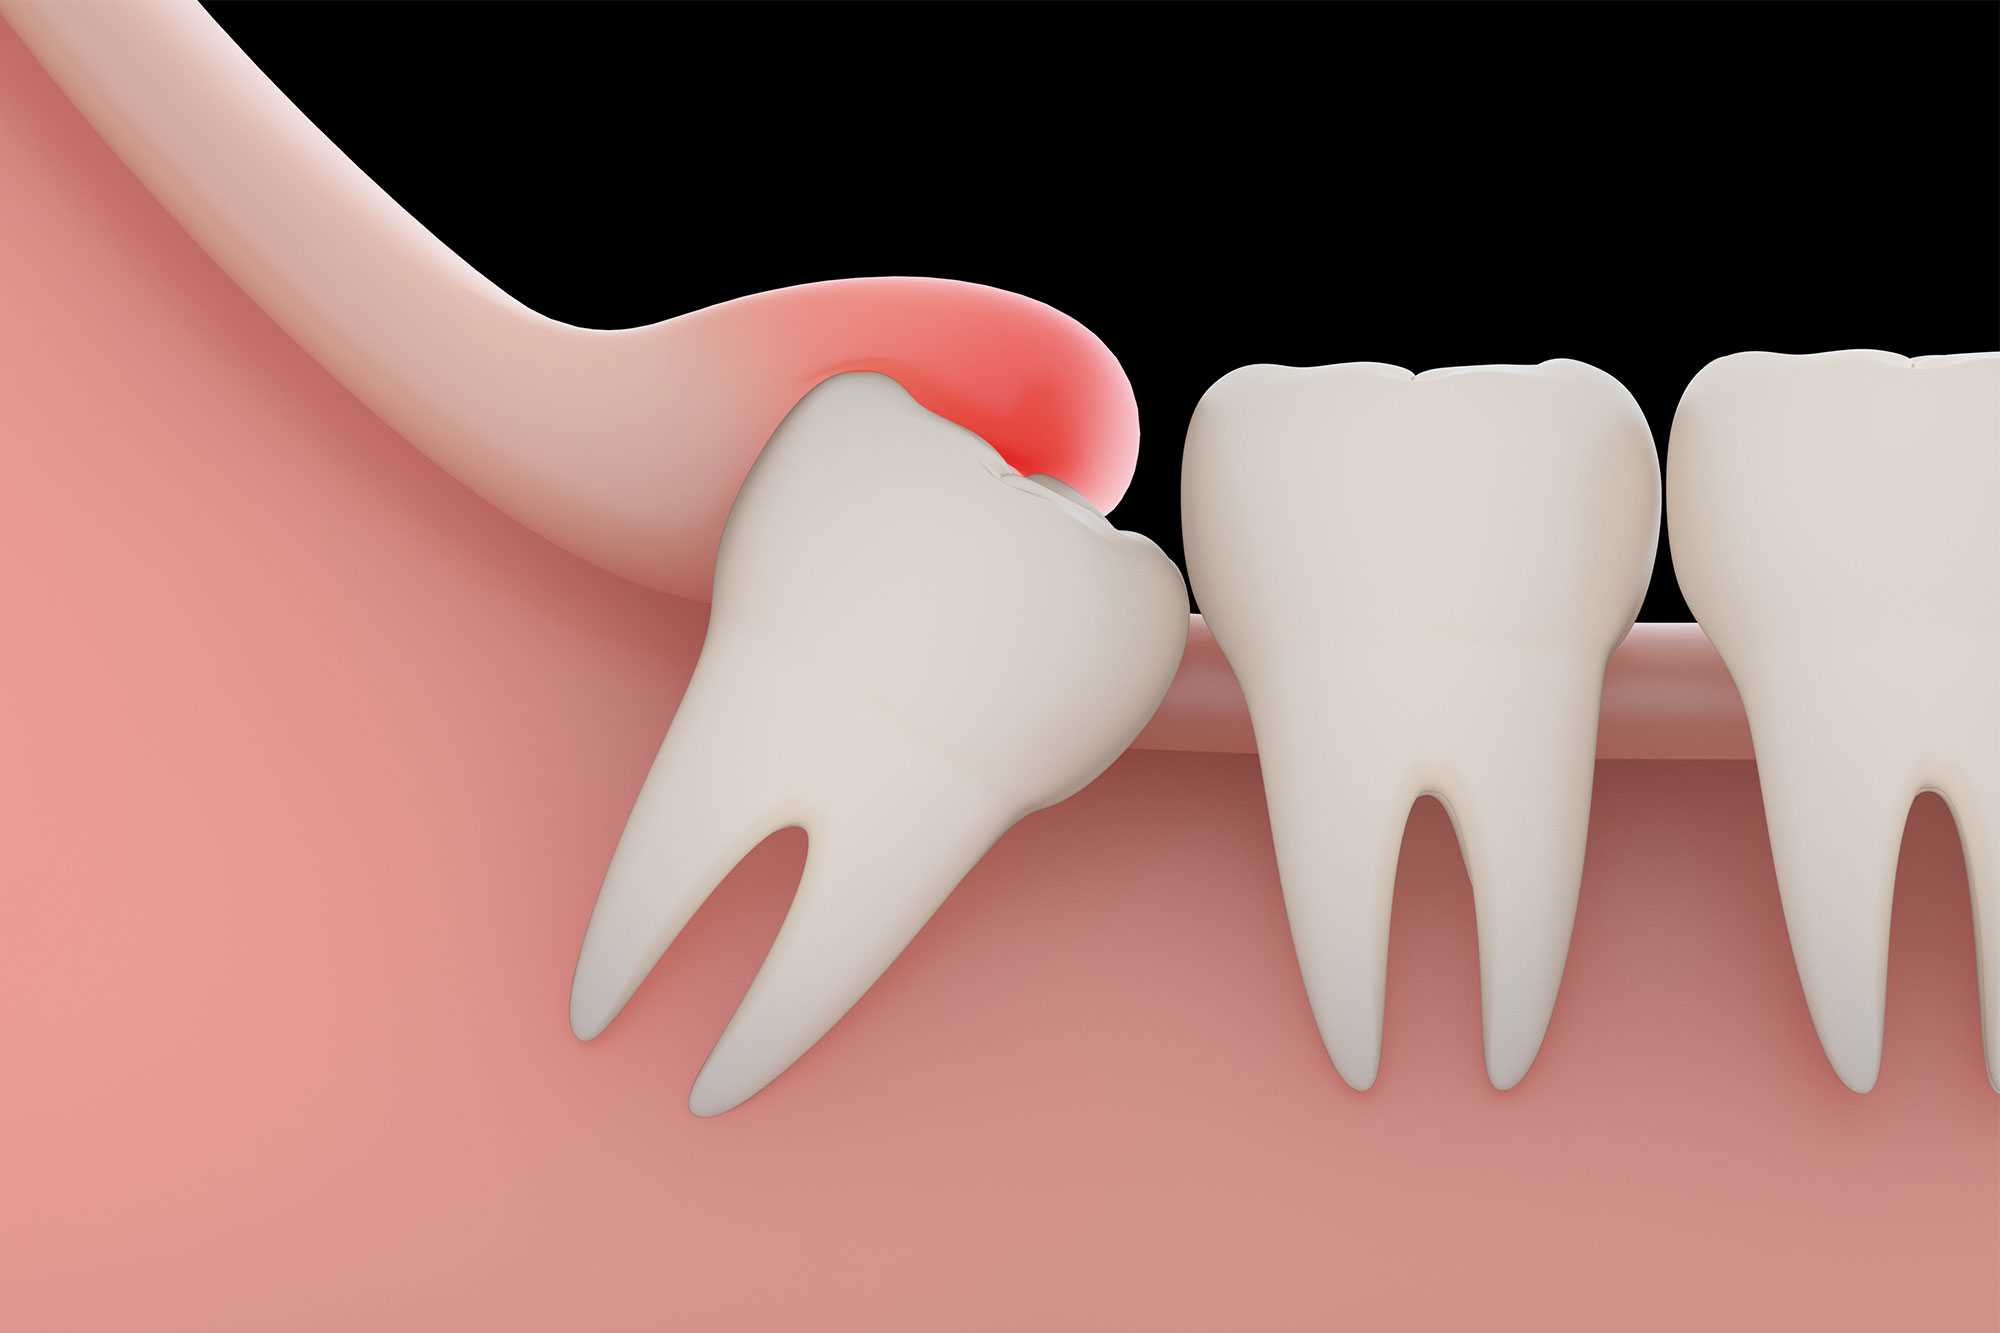 Wisdom Tooth Extraction (Removal): Procedure, Pain, Cost & Recovery